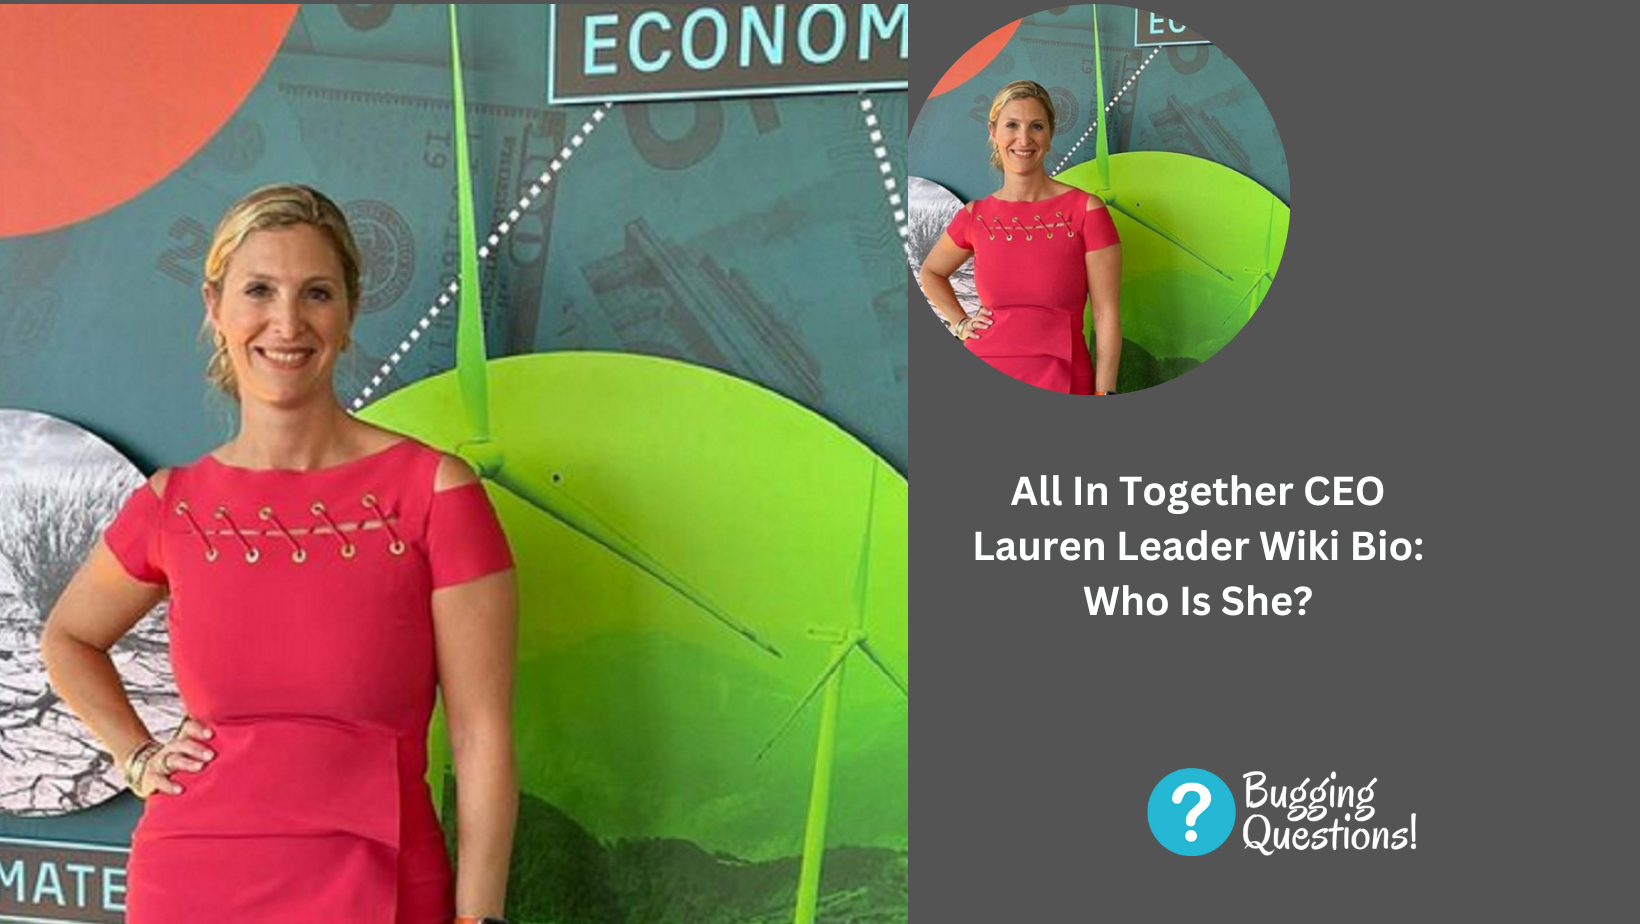 All In Together CEO Lauren Leader Wiki Bio: Who Is She?